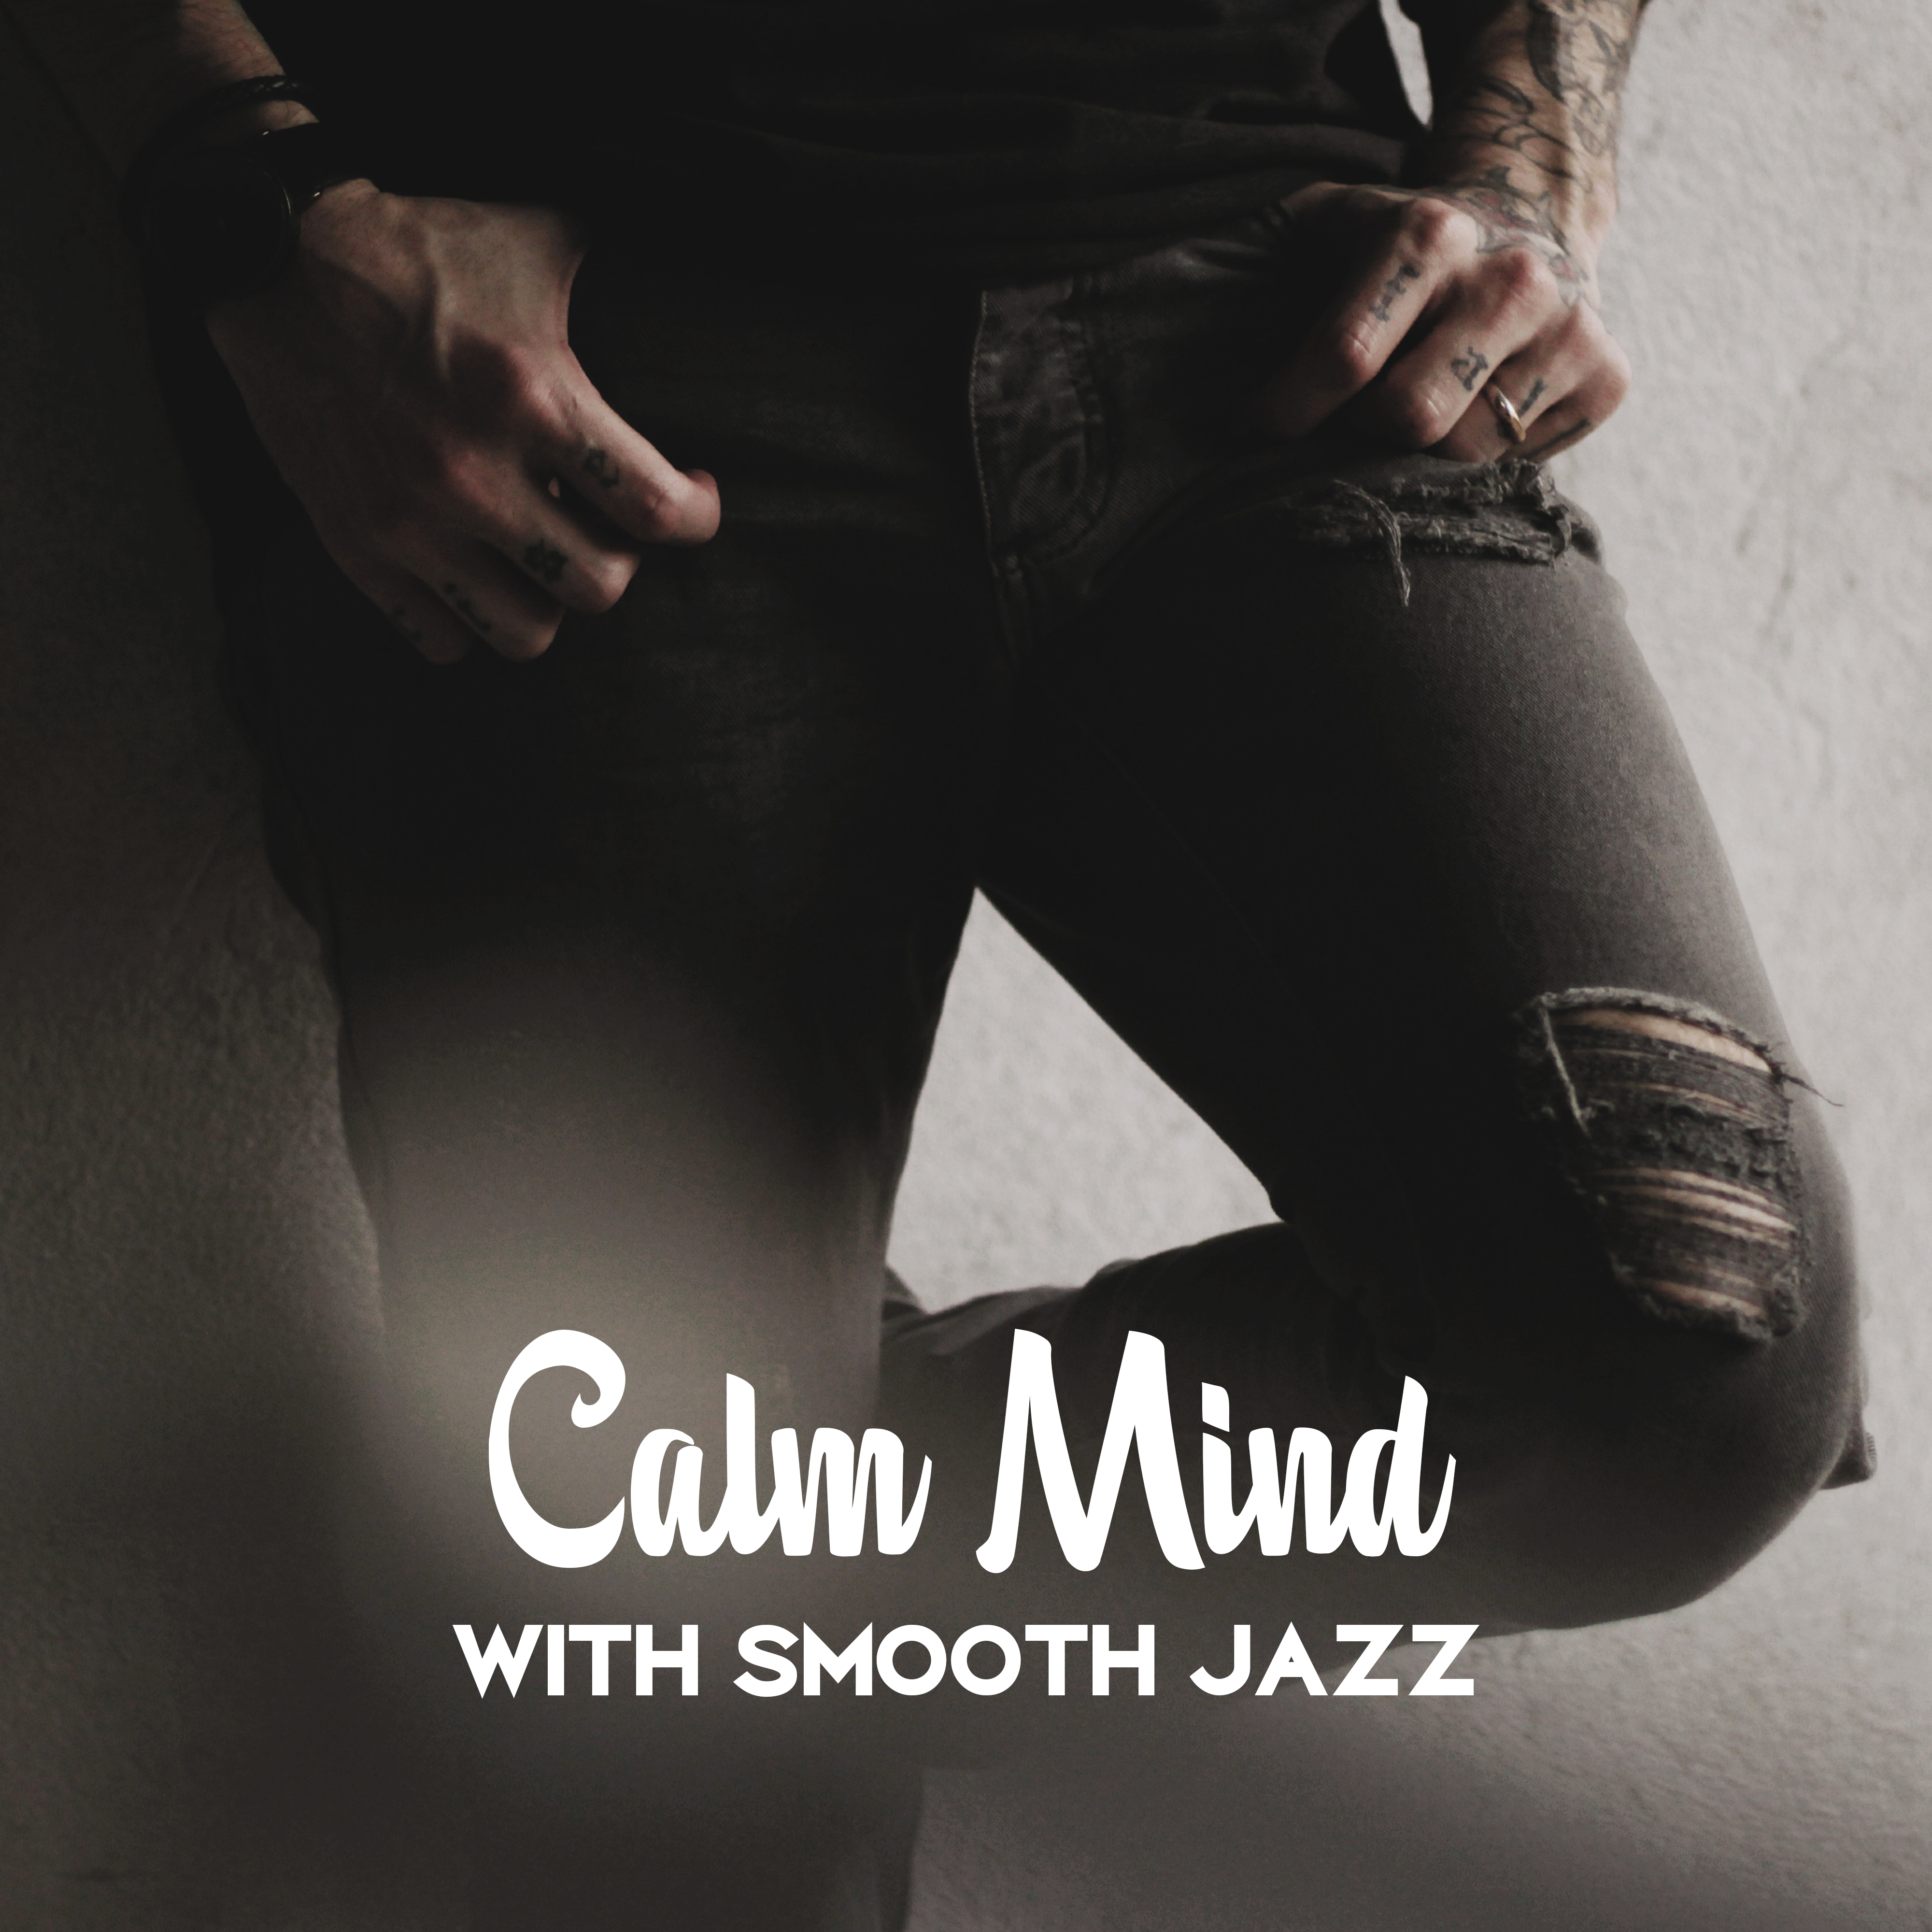 Calm Mind with Smooth Jazz – Relaxing Night Jazz Sounds, Peaceful Melodies to Calm Down, Stress Relief